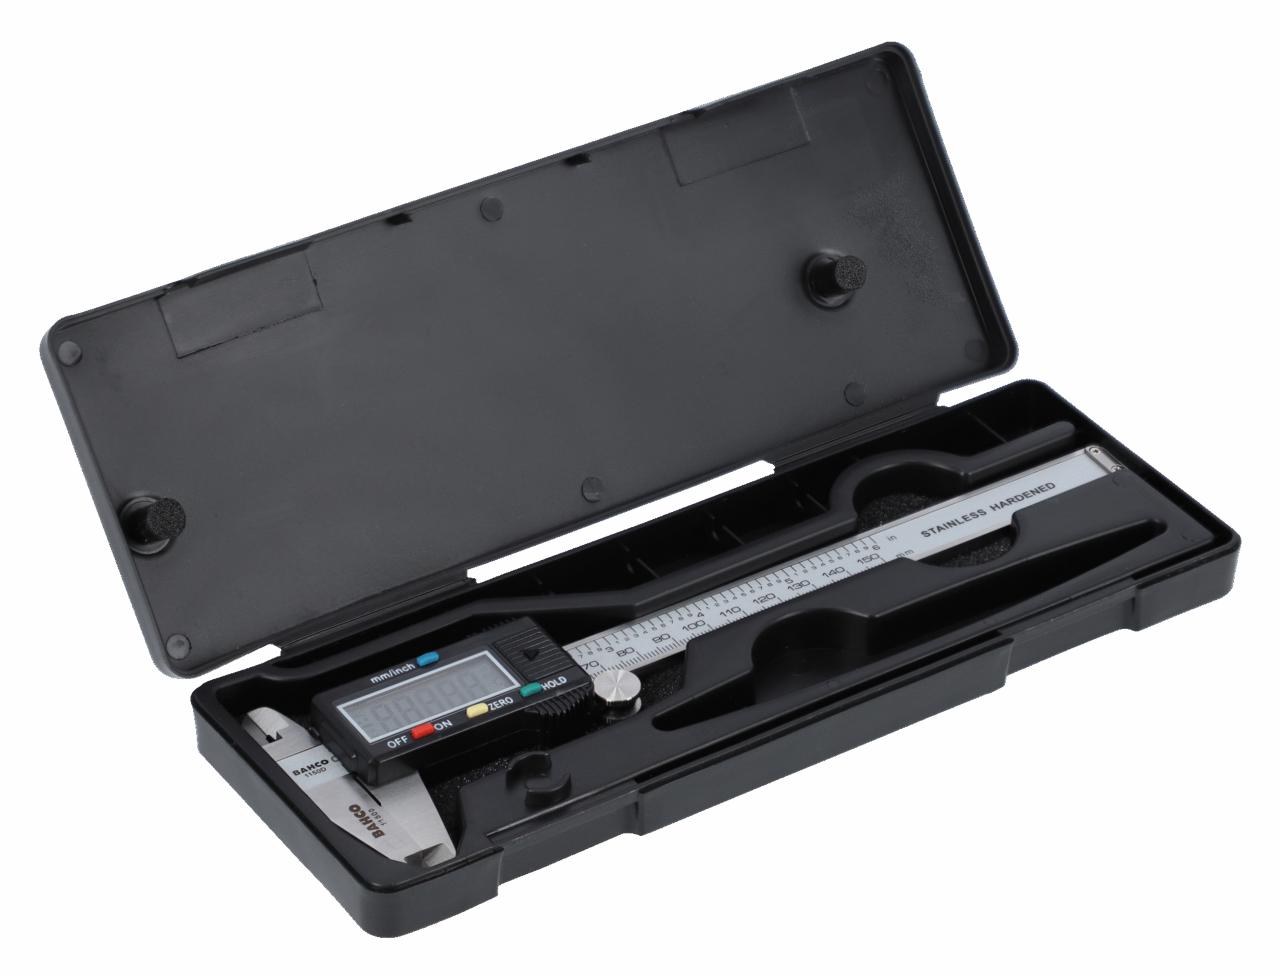 Digital caliper for precision measurement with LCD display